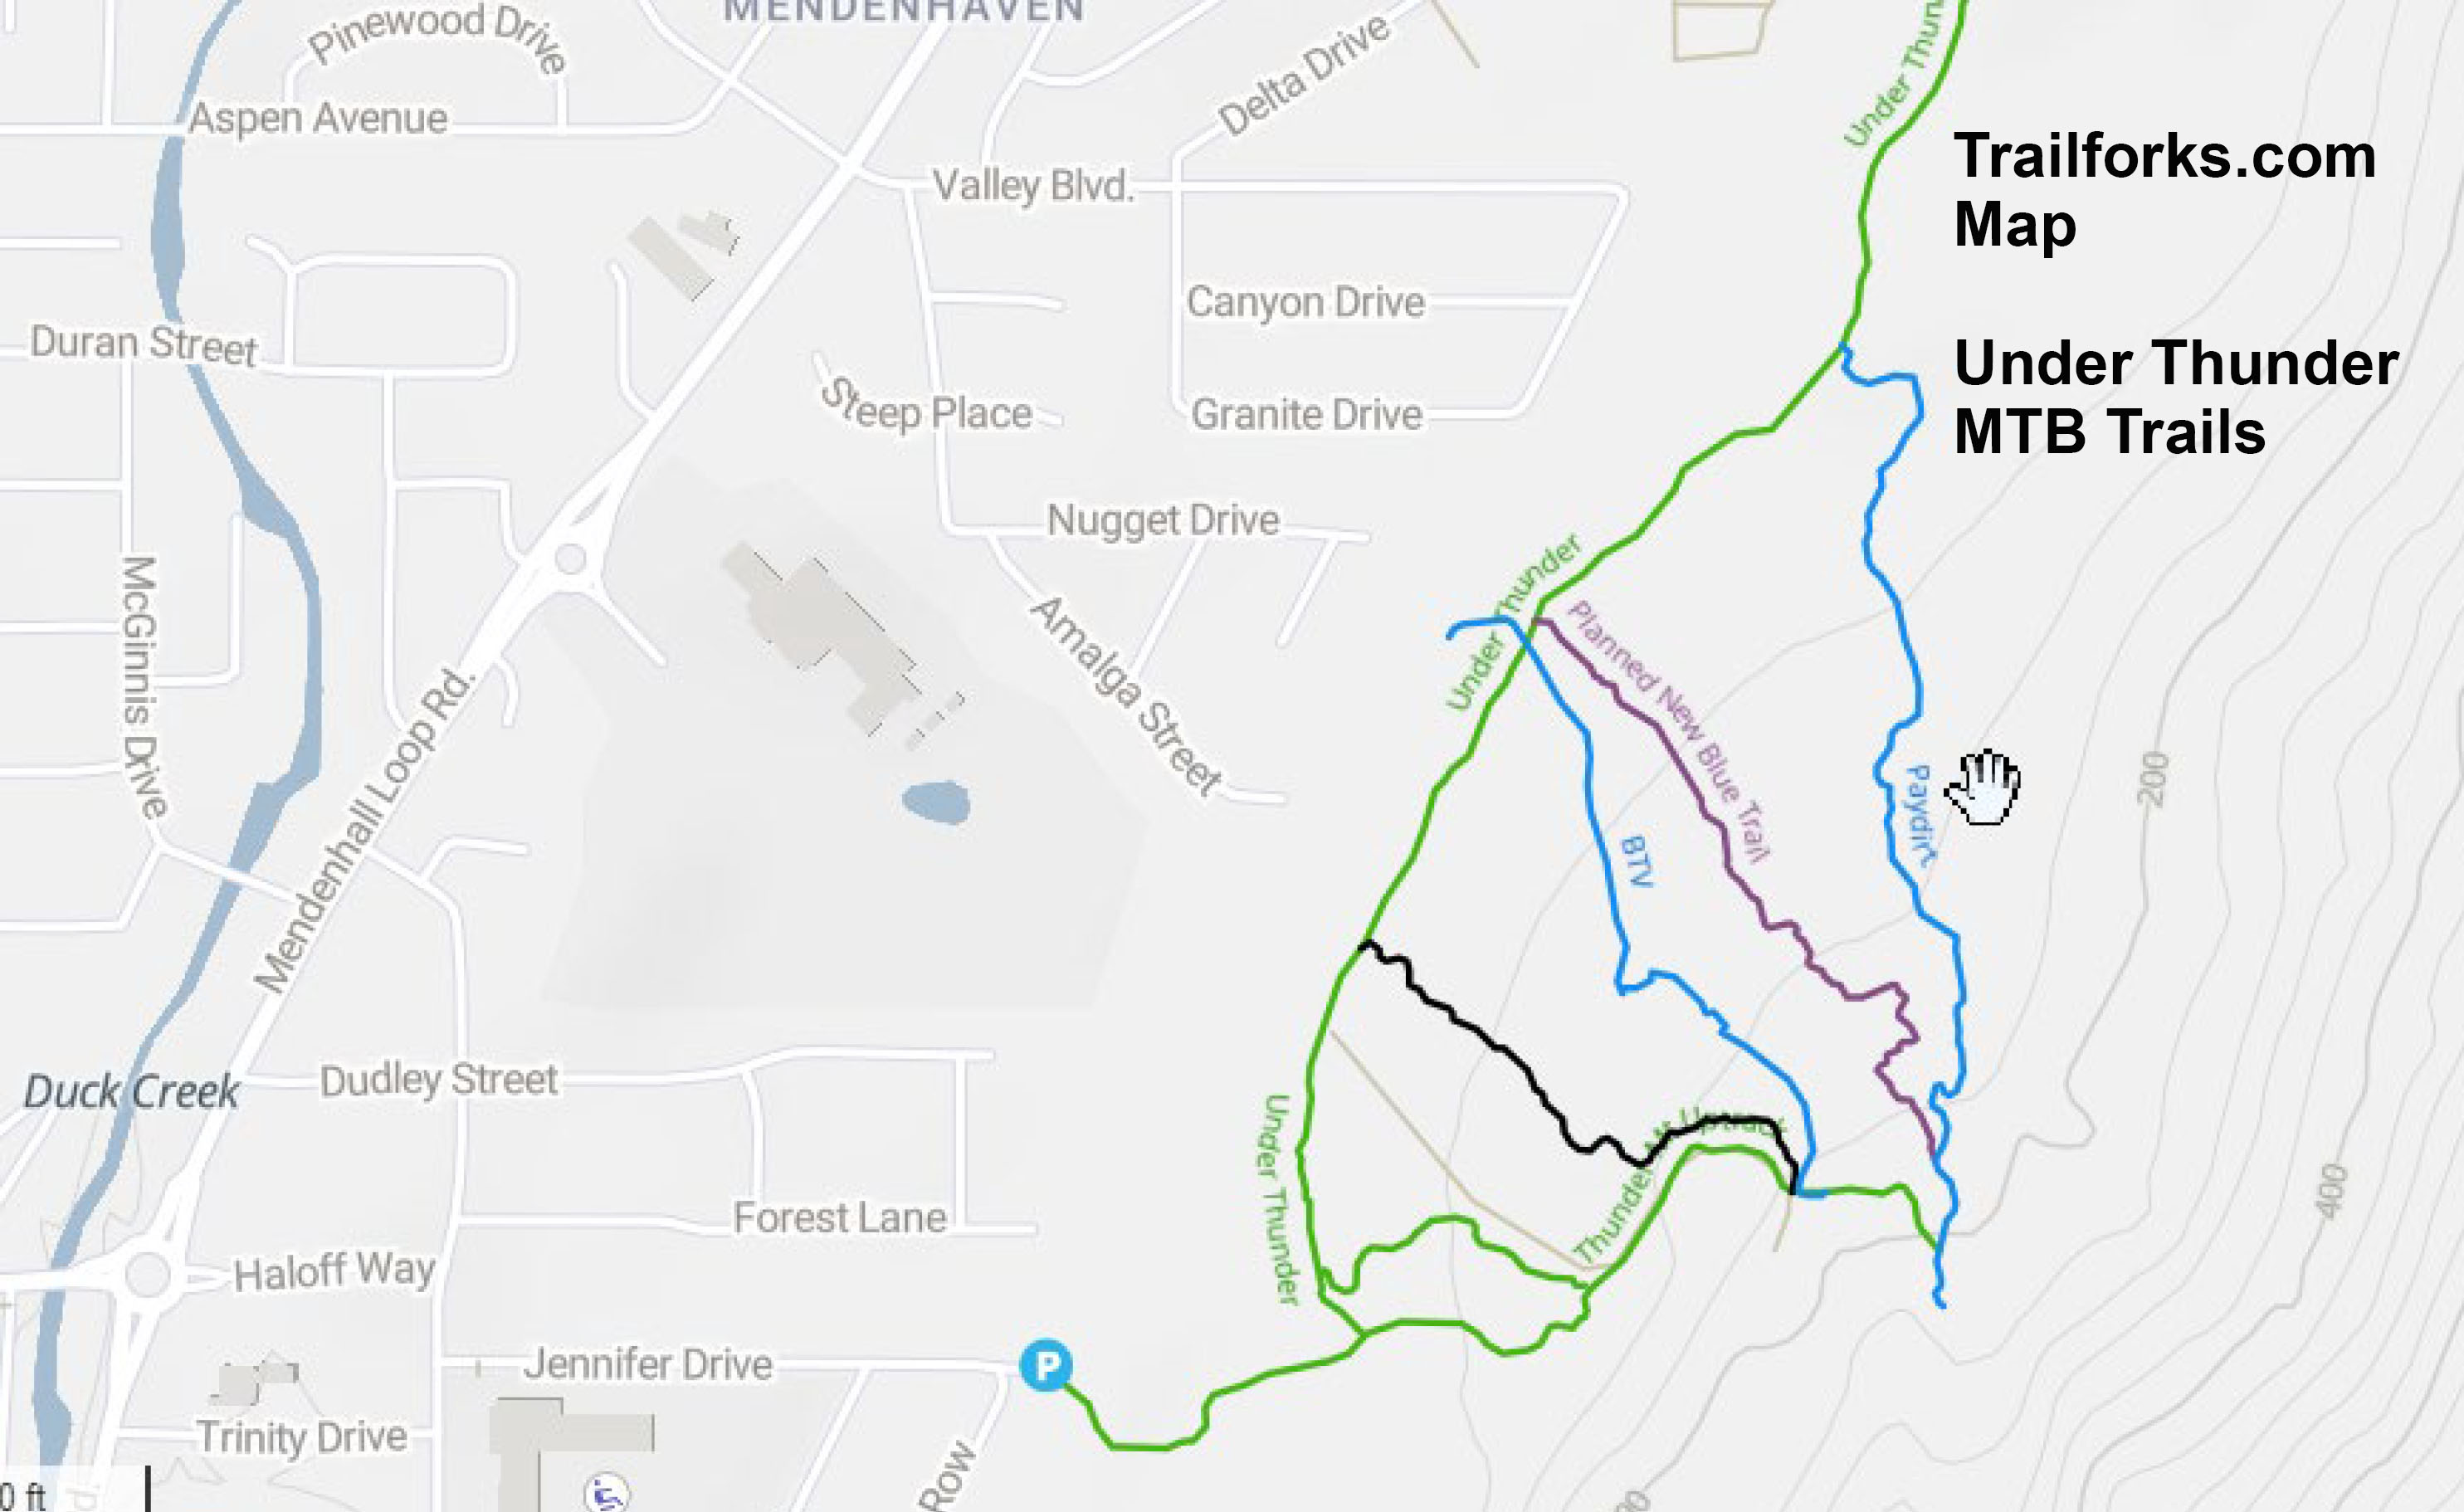 Existing and proposed mountain bike trails near the water tower on the Under Thunder Trail overlayed on a topographical map.